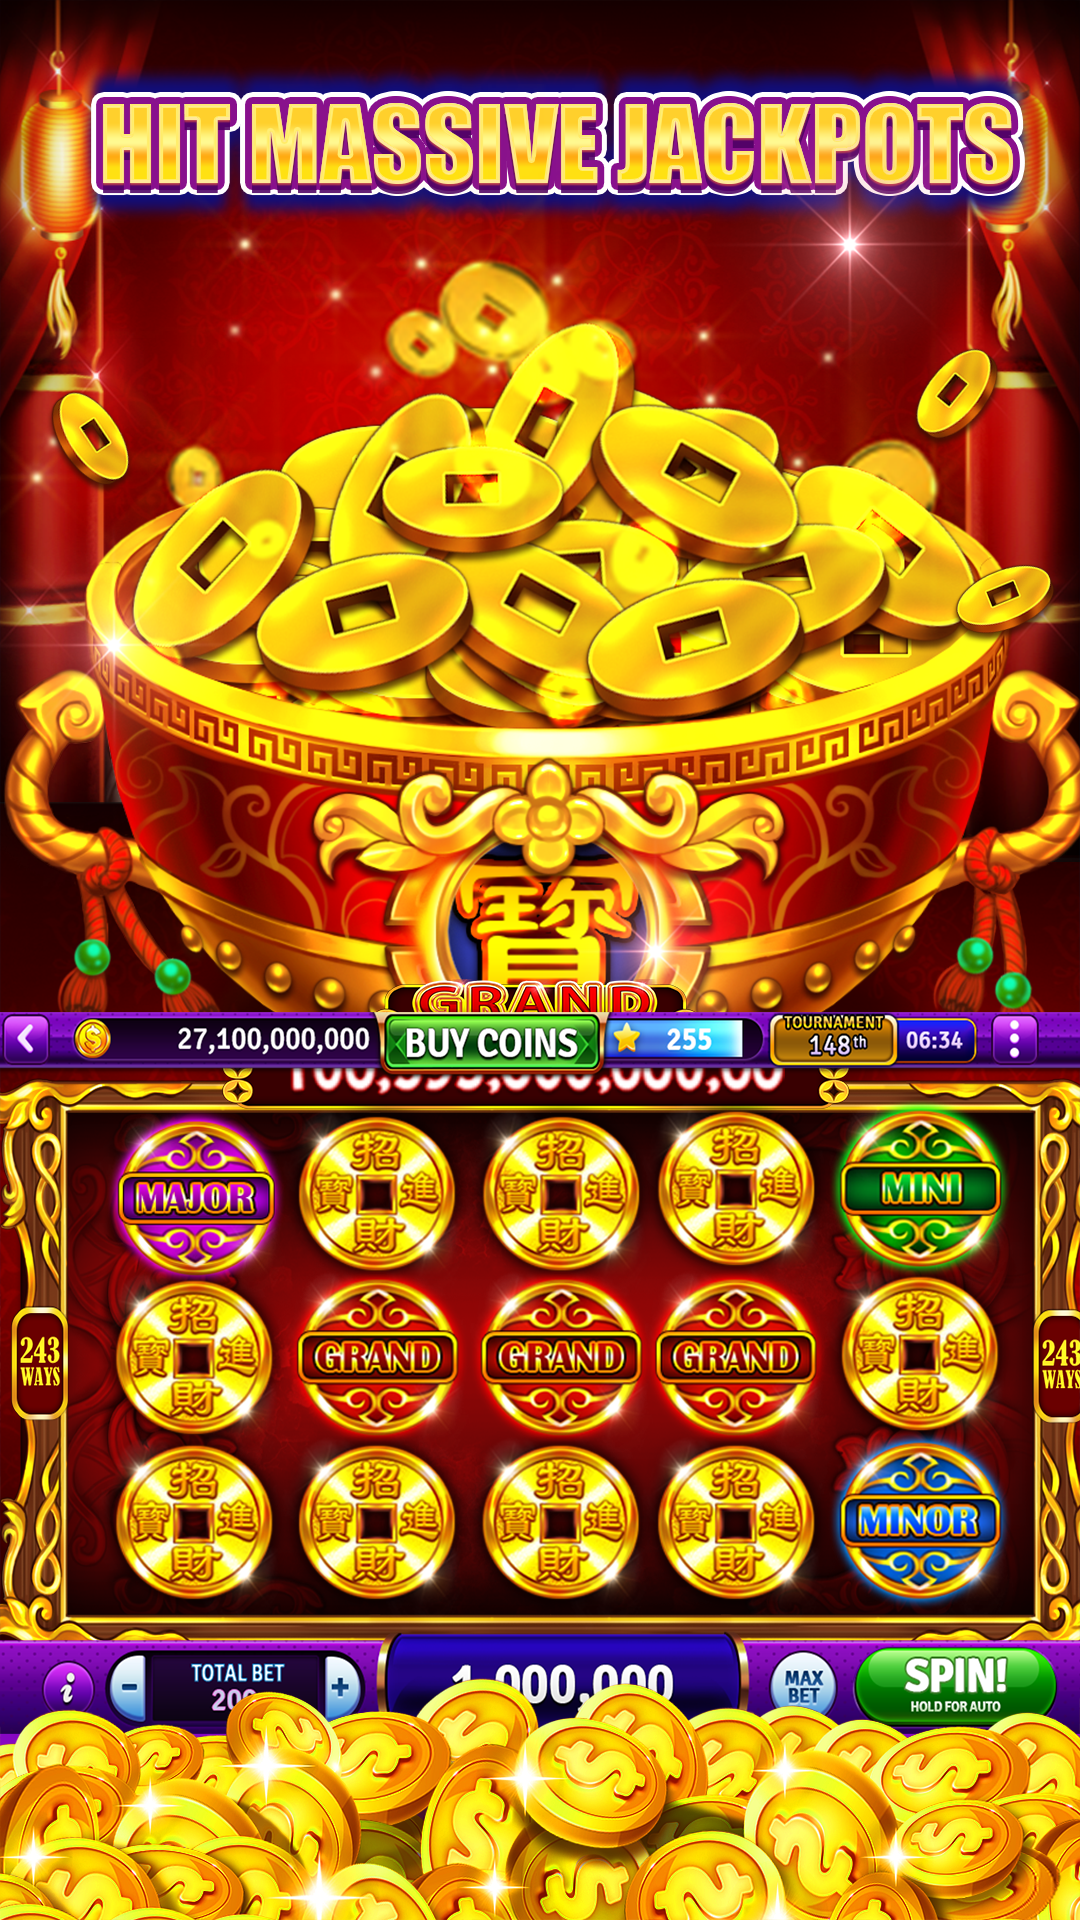  igt wheel of fortune slot machine for sale 